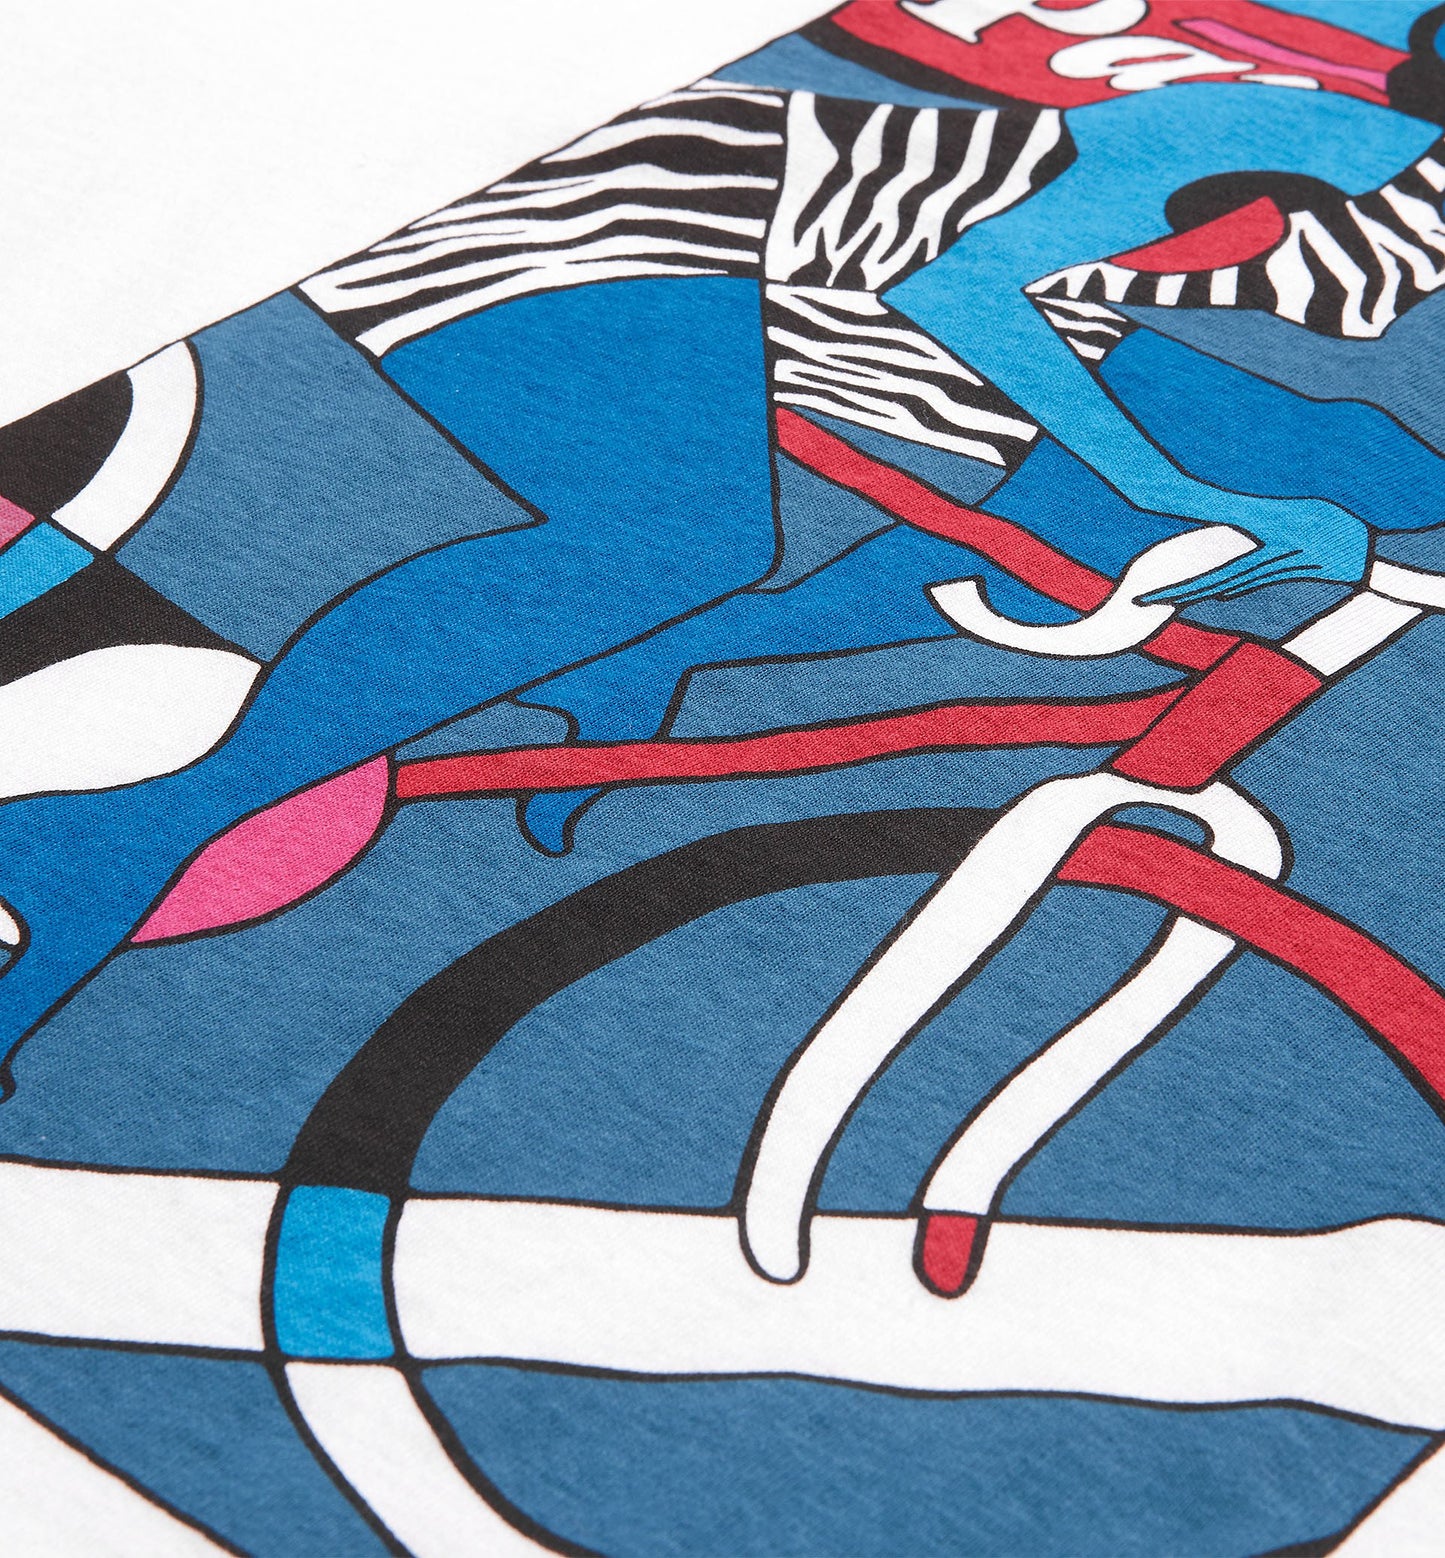 By Parra Photo Finish T-Shirt